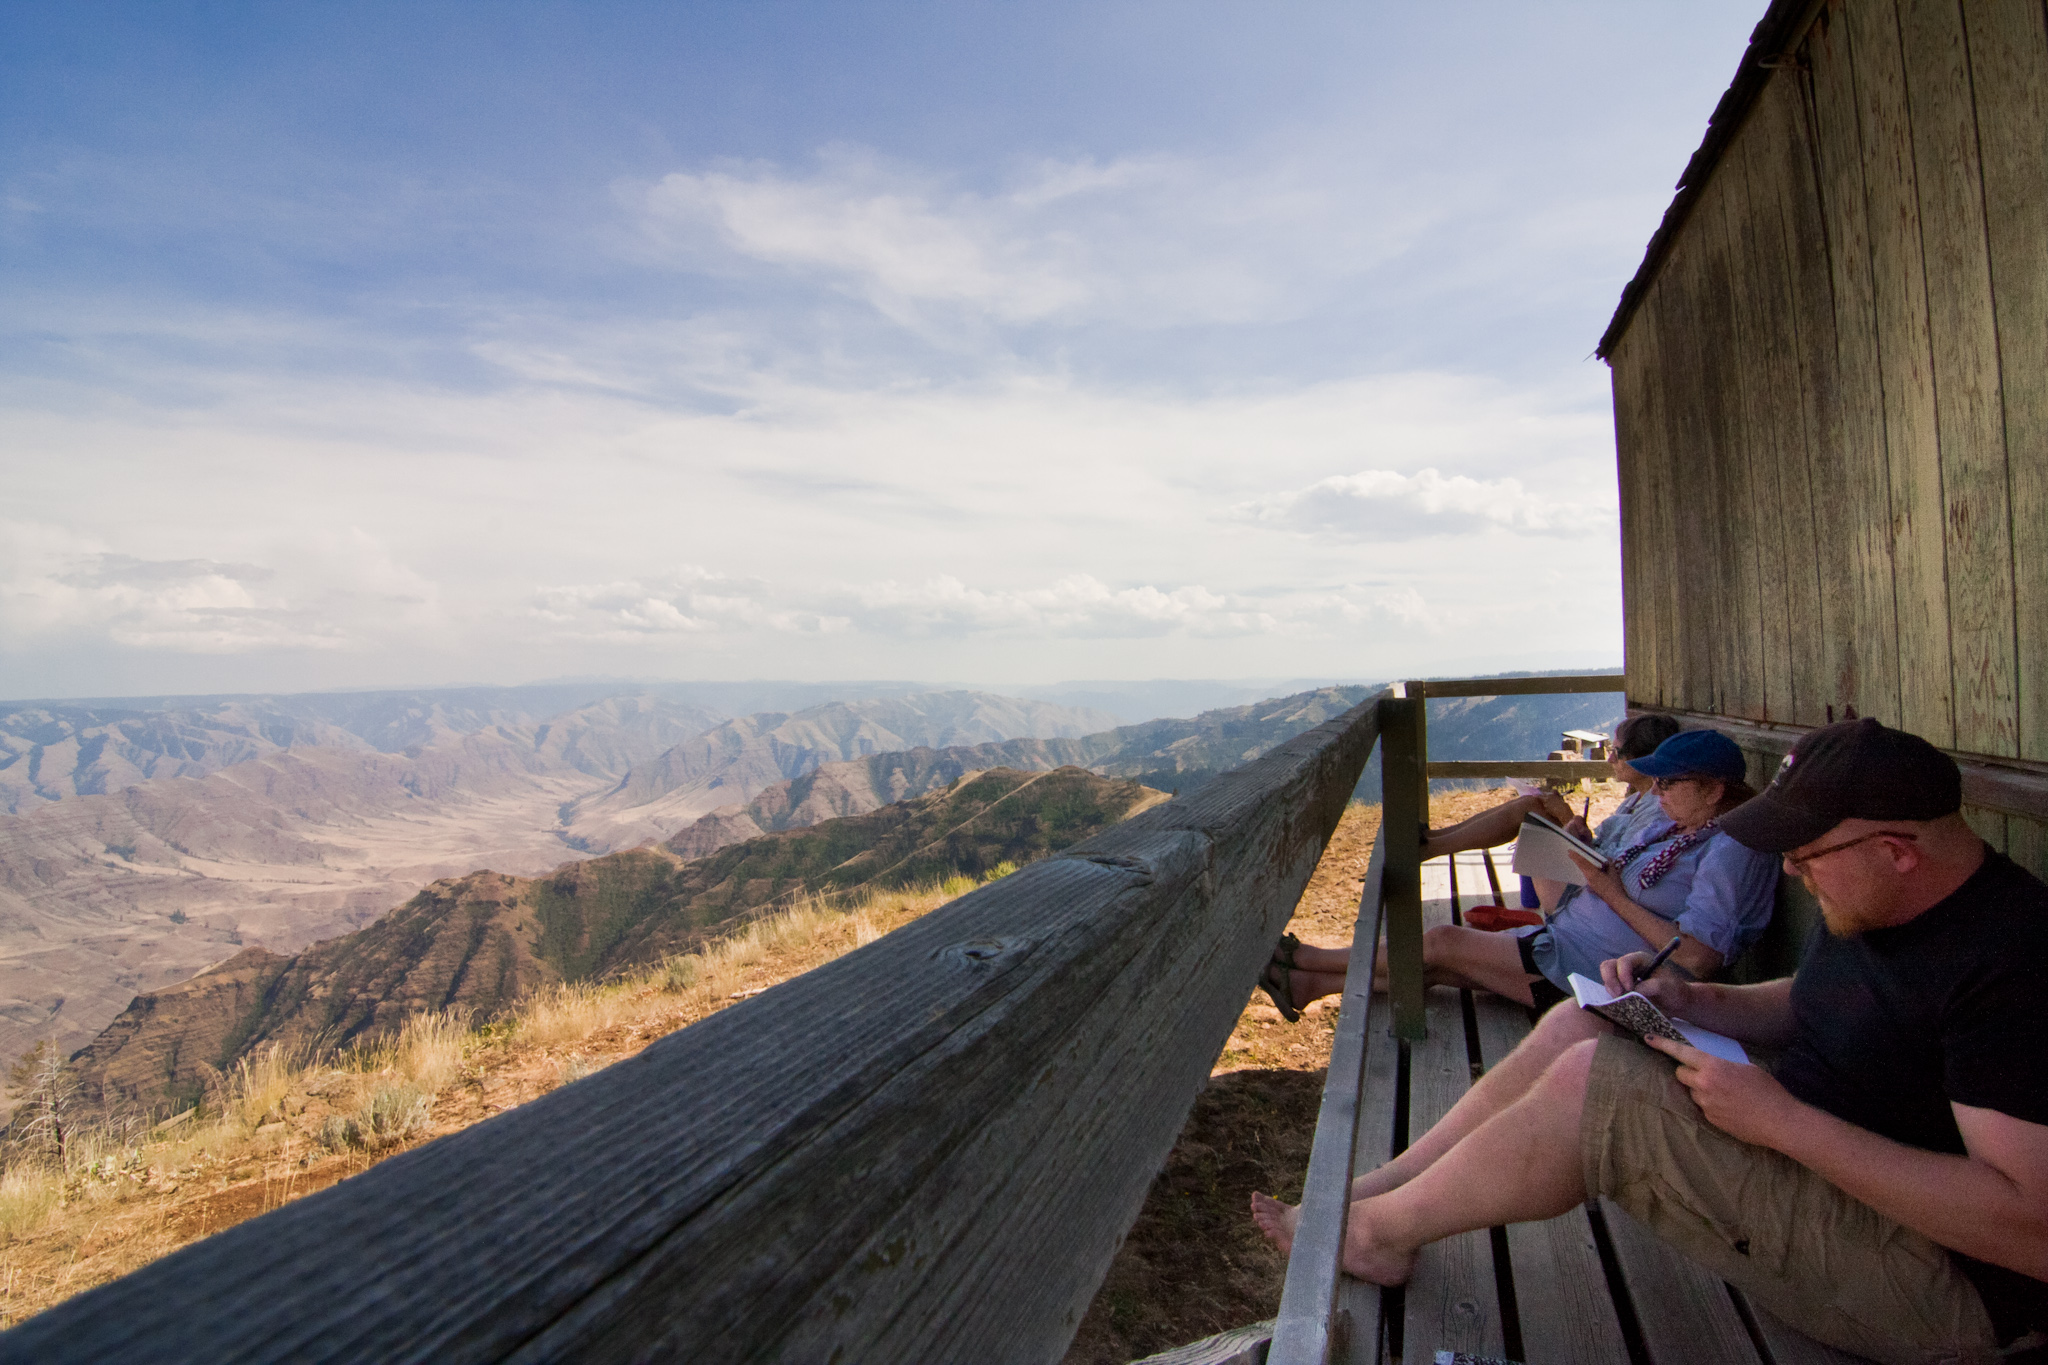 In love with the view and writing in journals, three writers sit on the deck of a fire outlook overlooking Hells Canyon in NE Oregon.